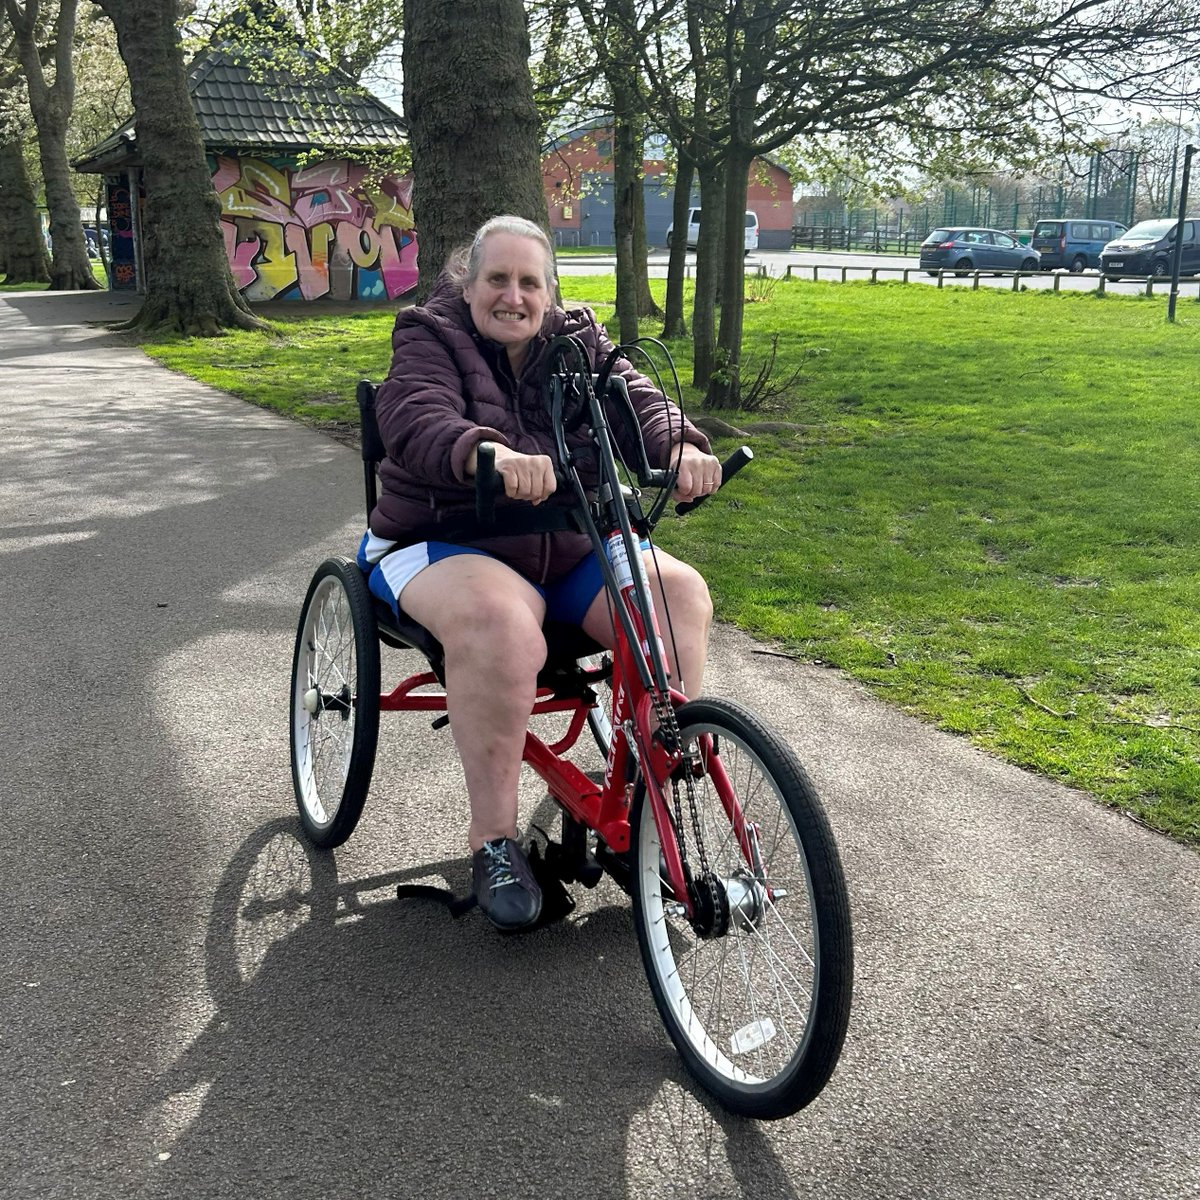 @WfACharity 💜 Everyone was able to enjoy the bike riding experience thanks to the adapted equipment, feeling the wind in their faces and the sense of accomplishment that comes from finishing a ride!

#Accessibility #AdaptedBike #ActiveForApril #LearningDisability 

[2/2 🧵]